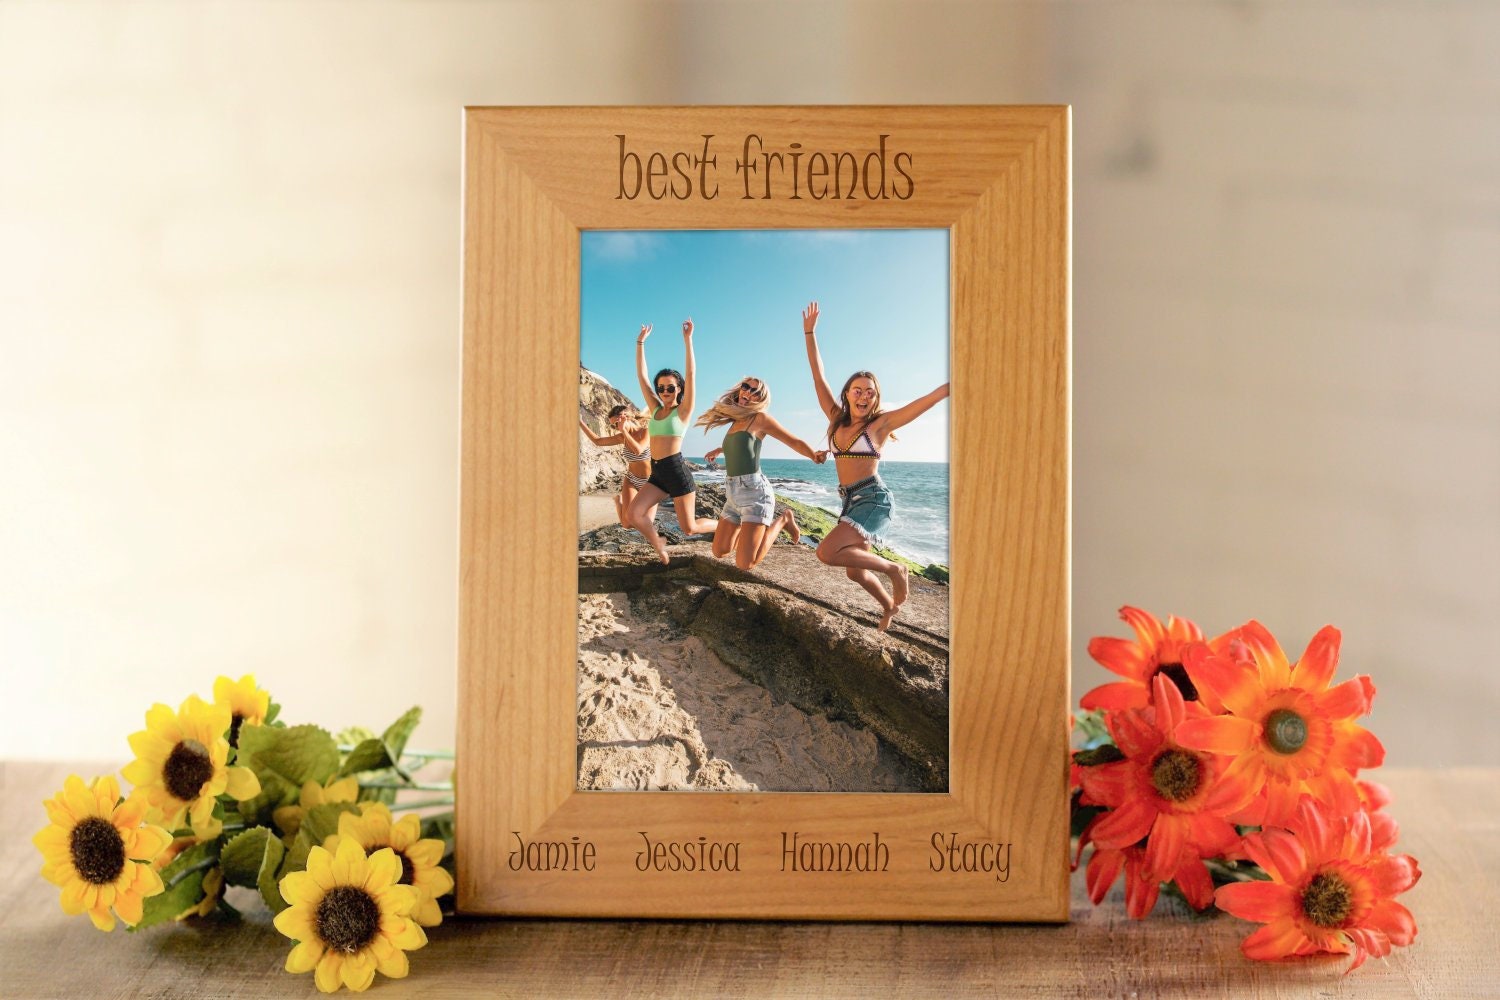 FAMILY & FRIENDS Brilliant Crystal 4x6 frame by Orrefors® - Picture Frames,  Photo Albums, Personalized and Engraved Digital Photo Gifts - SendAFrame